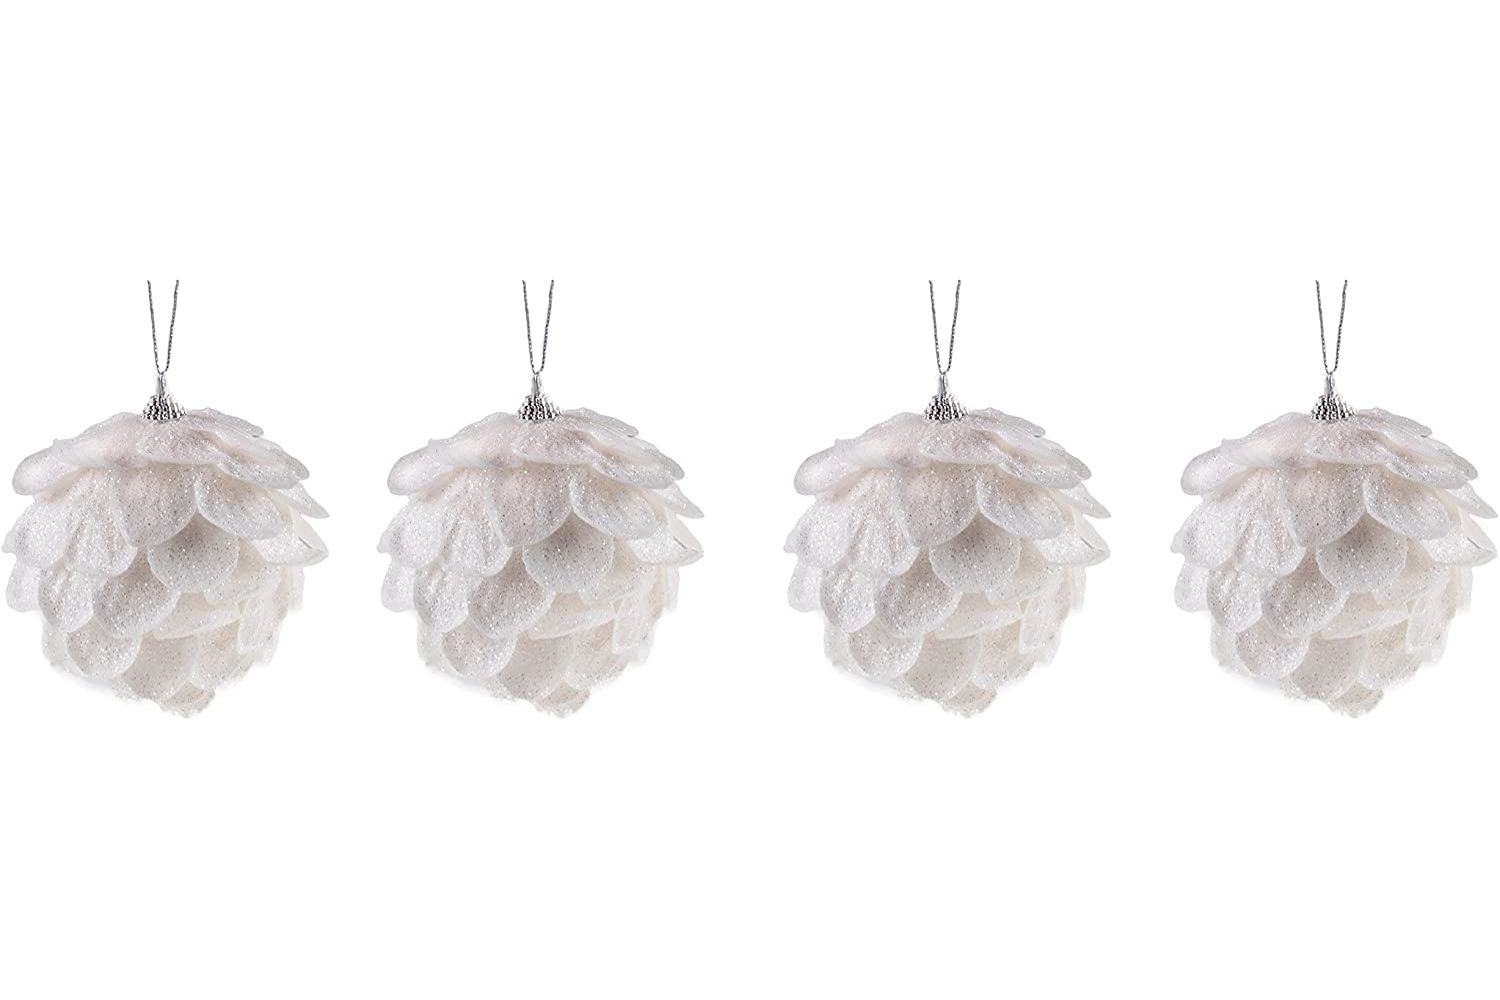 The Best Christmas Ornaments Option: Clever Creations White Flower Christmas Tree Ornament